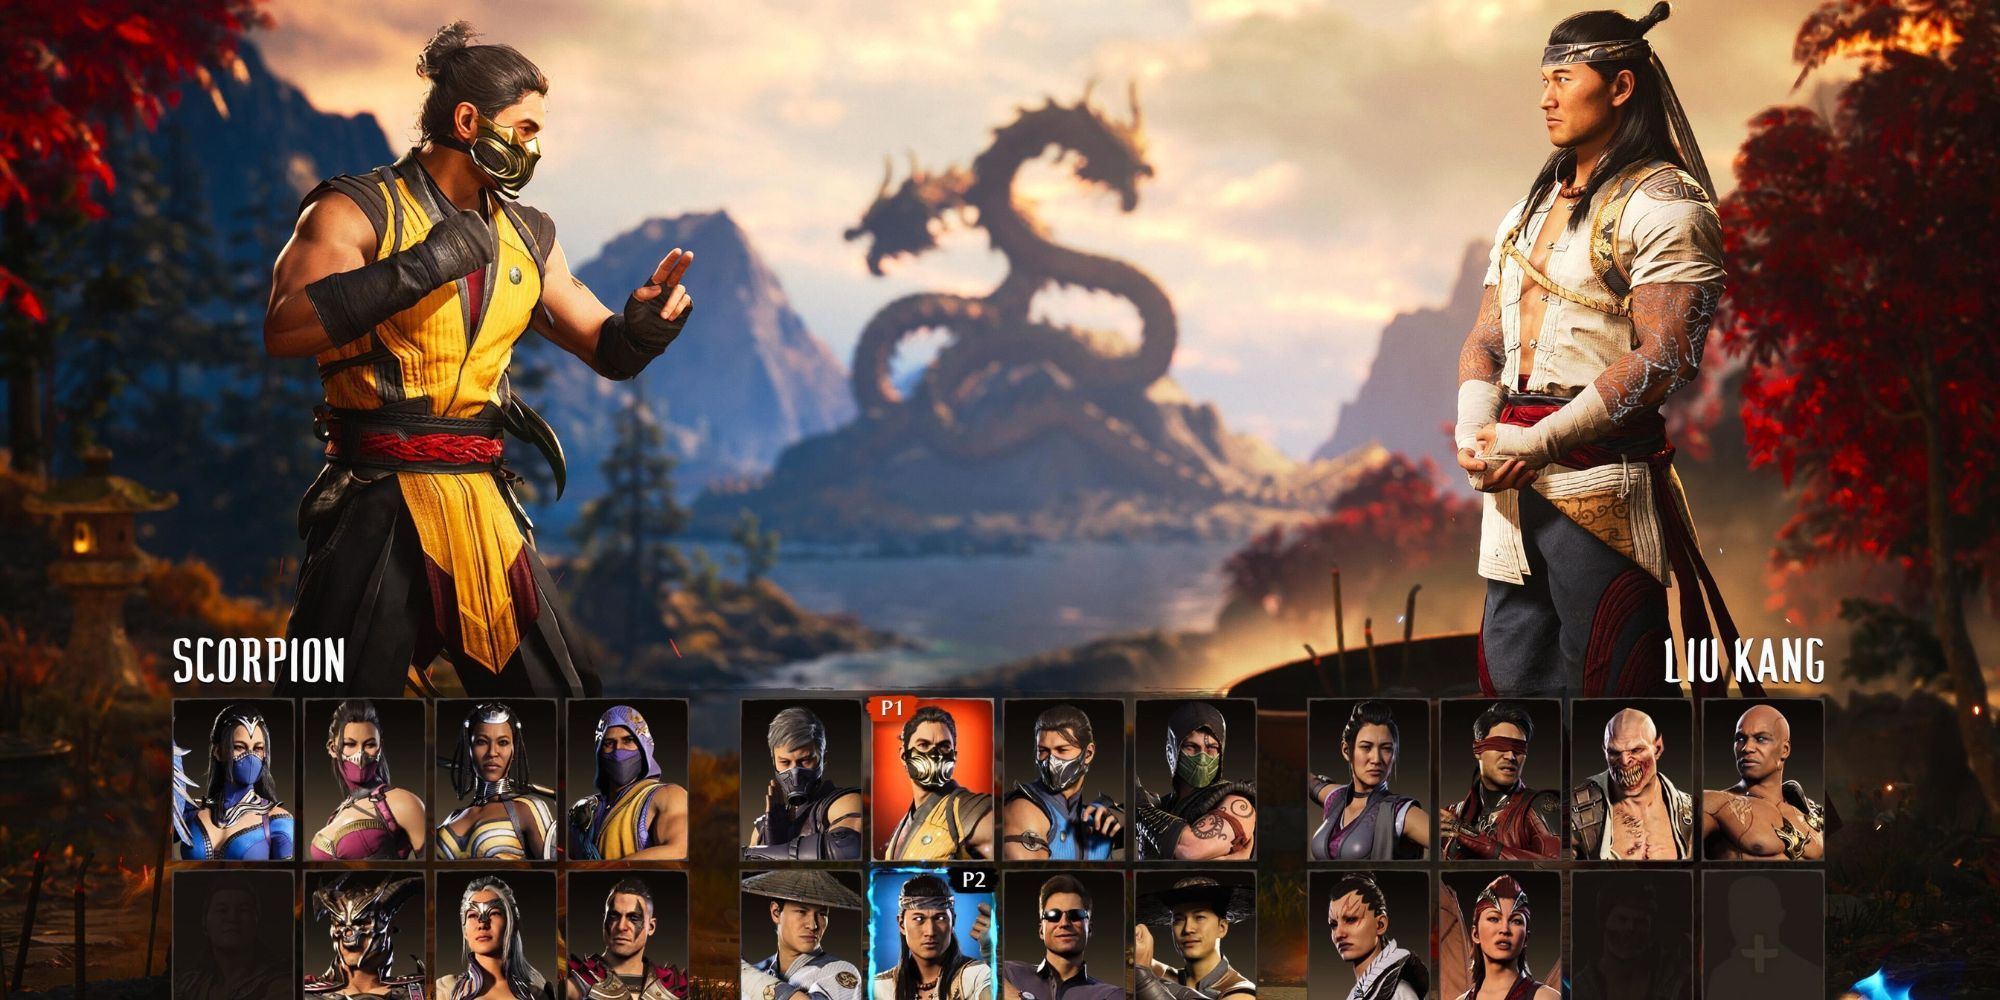 Mortal Kombat 1 reintroduces obscure characters and crossover fighters